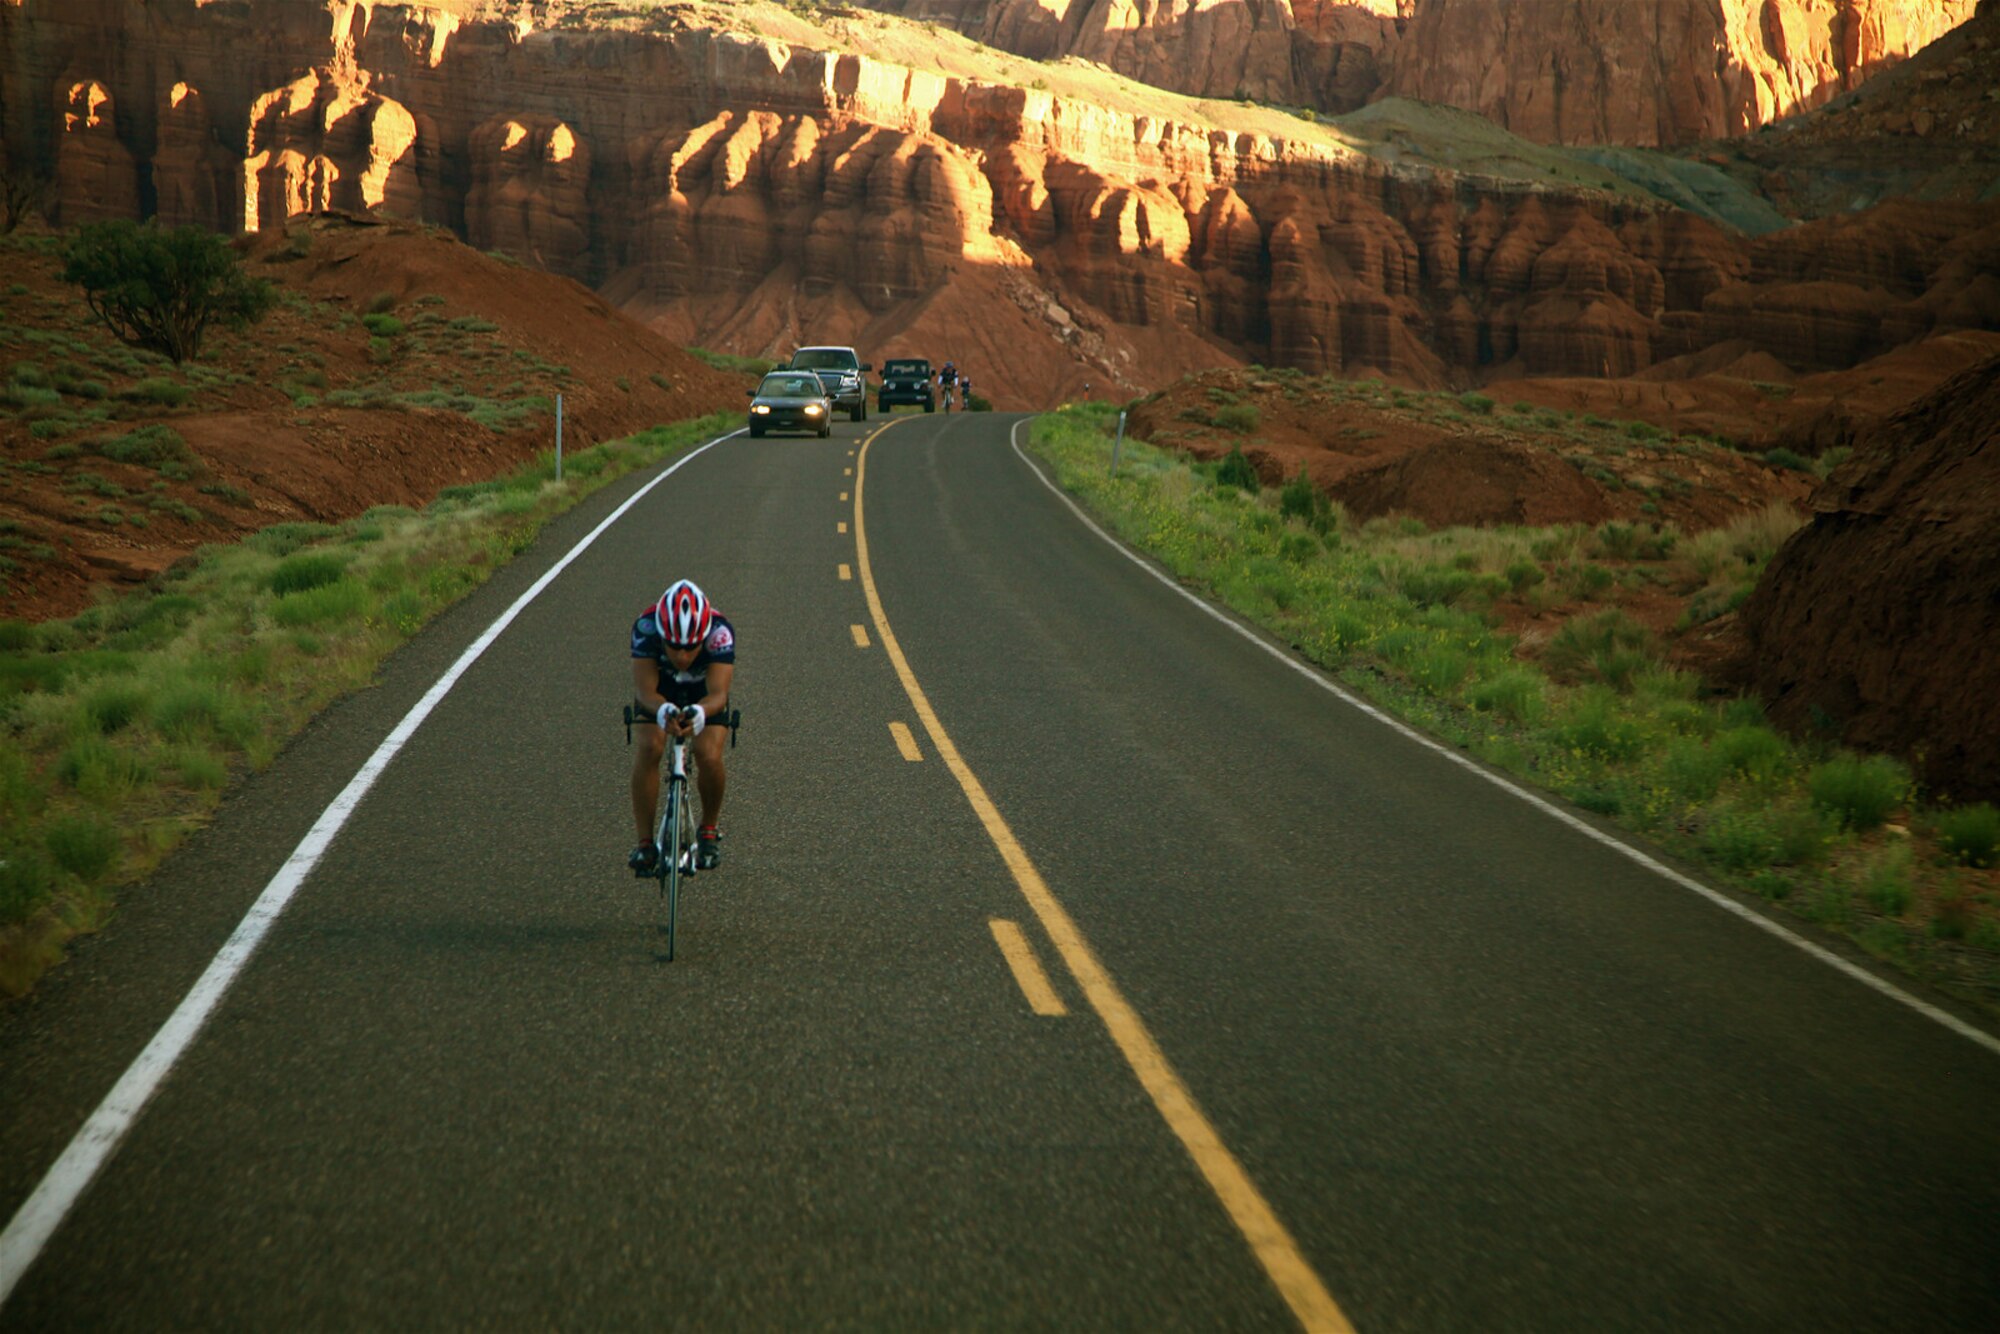 Staff Sgt. Marc Esposito from the 21st Special Tactics Squadron, Pope Air Force Base, N.C, nearing the 1,000-mile mark in Utah. Sergeant Esposito is participating in Sea to Shining Sea, a 4,000-mile bike ride which started at the Golden Gate Bridge and will end at Virginia Beach, Va., July 24. The goal of the ride is to honor the courage of our service men and women, recognize the strength of the American spirit and challenge perceptions of how we view athletes. (Photo by Austin Smithard) 